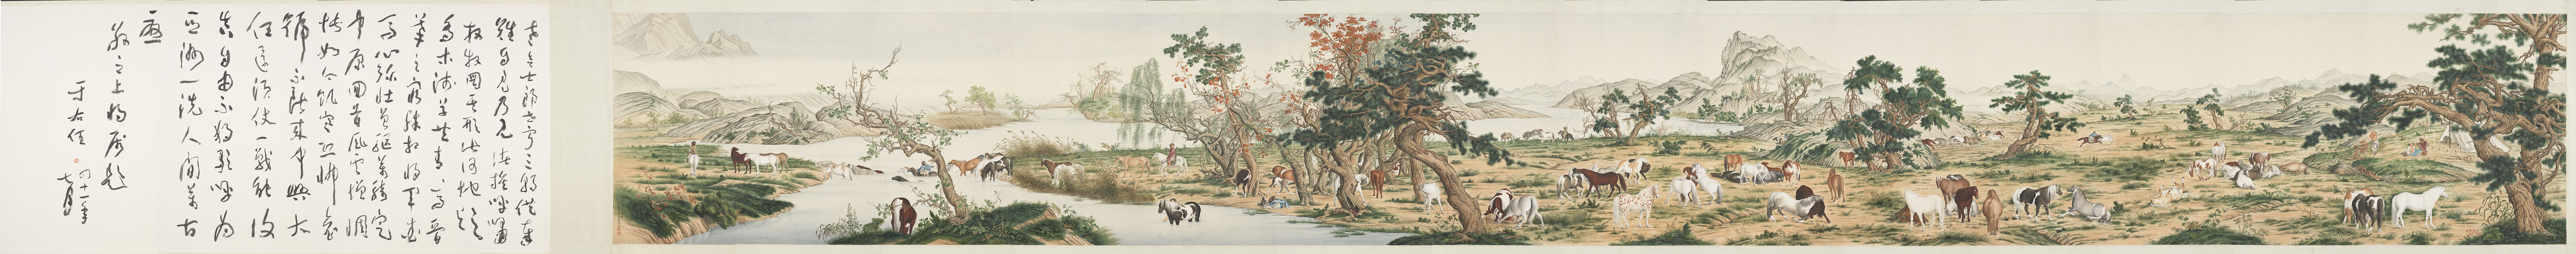 One Hundred Horses, Ma Chin (1900-1970), Republican period